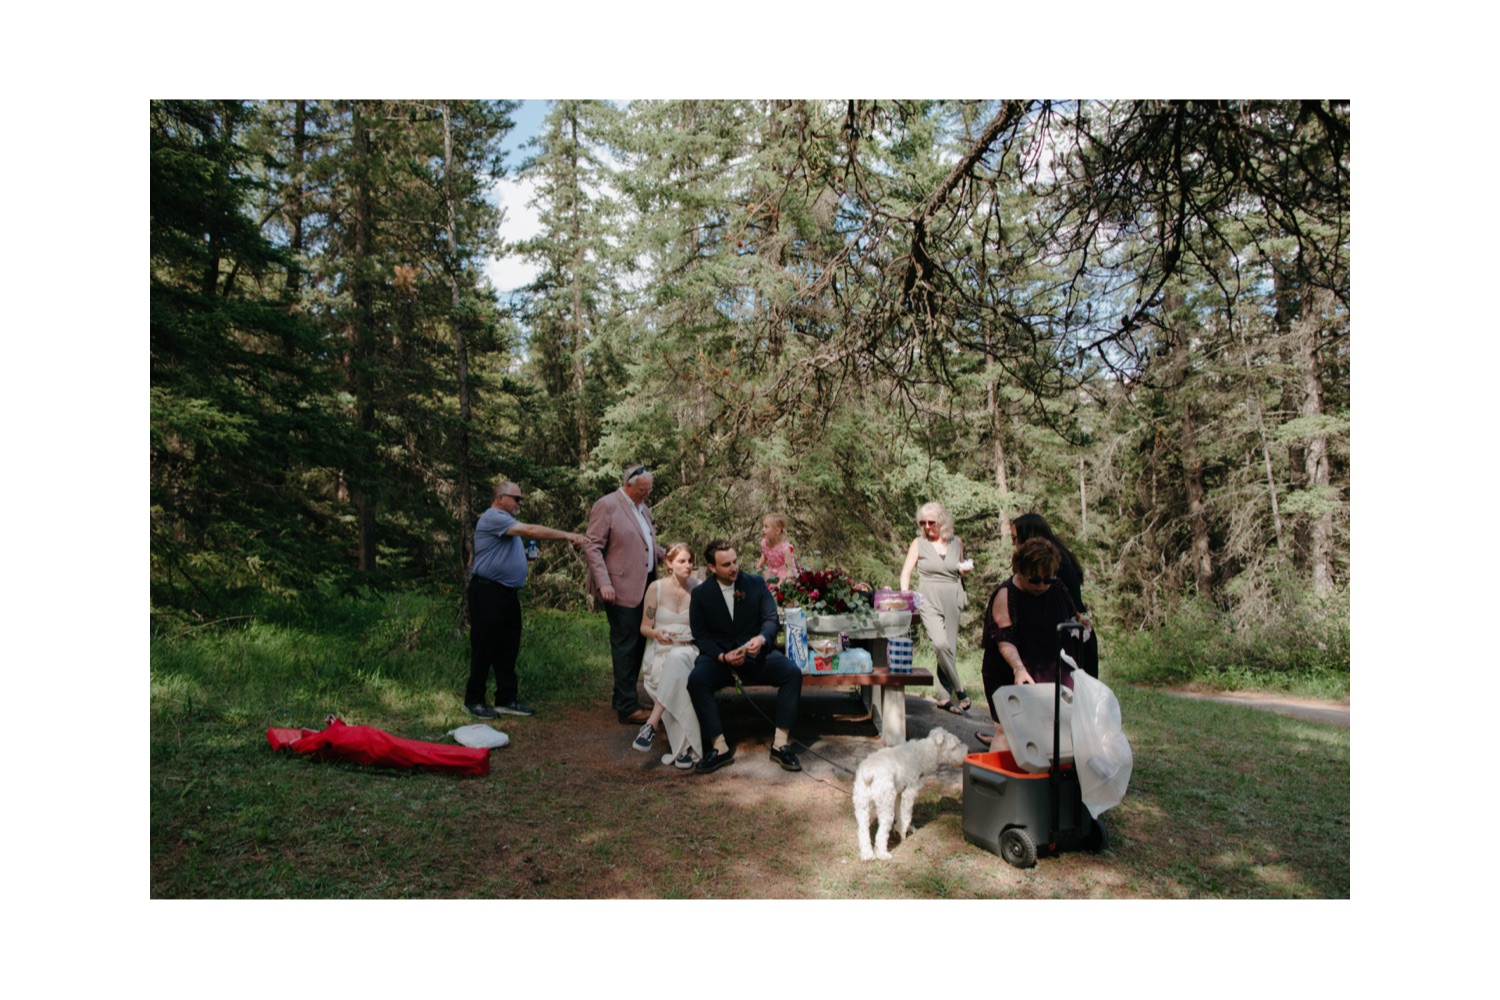 Picnic table wedding lunch on the shores of Johnson Lake in Banff National Park